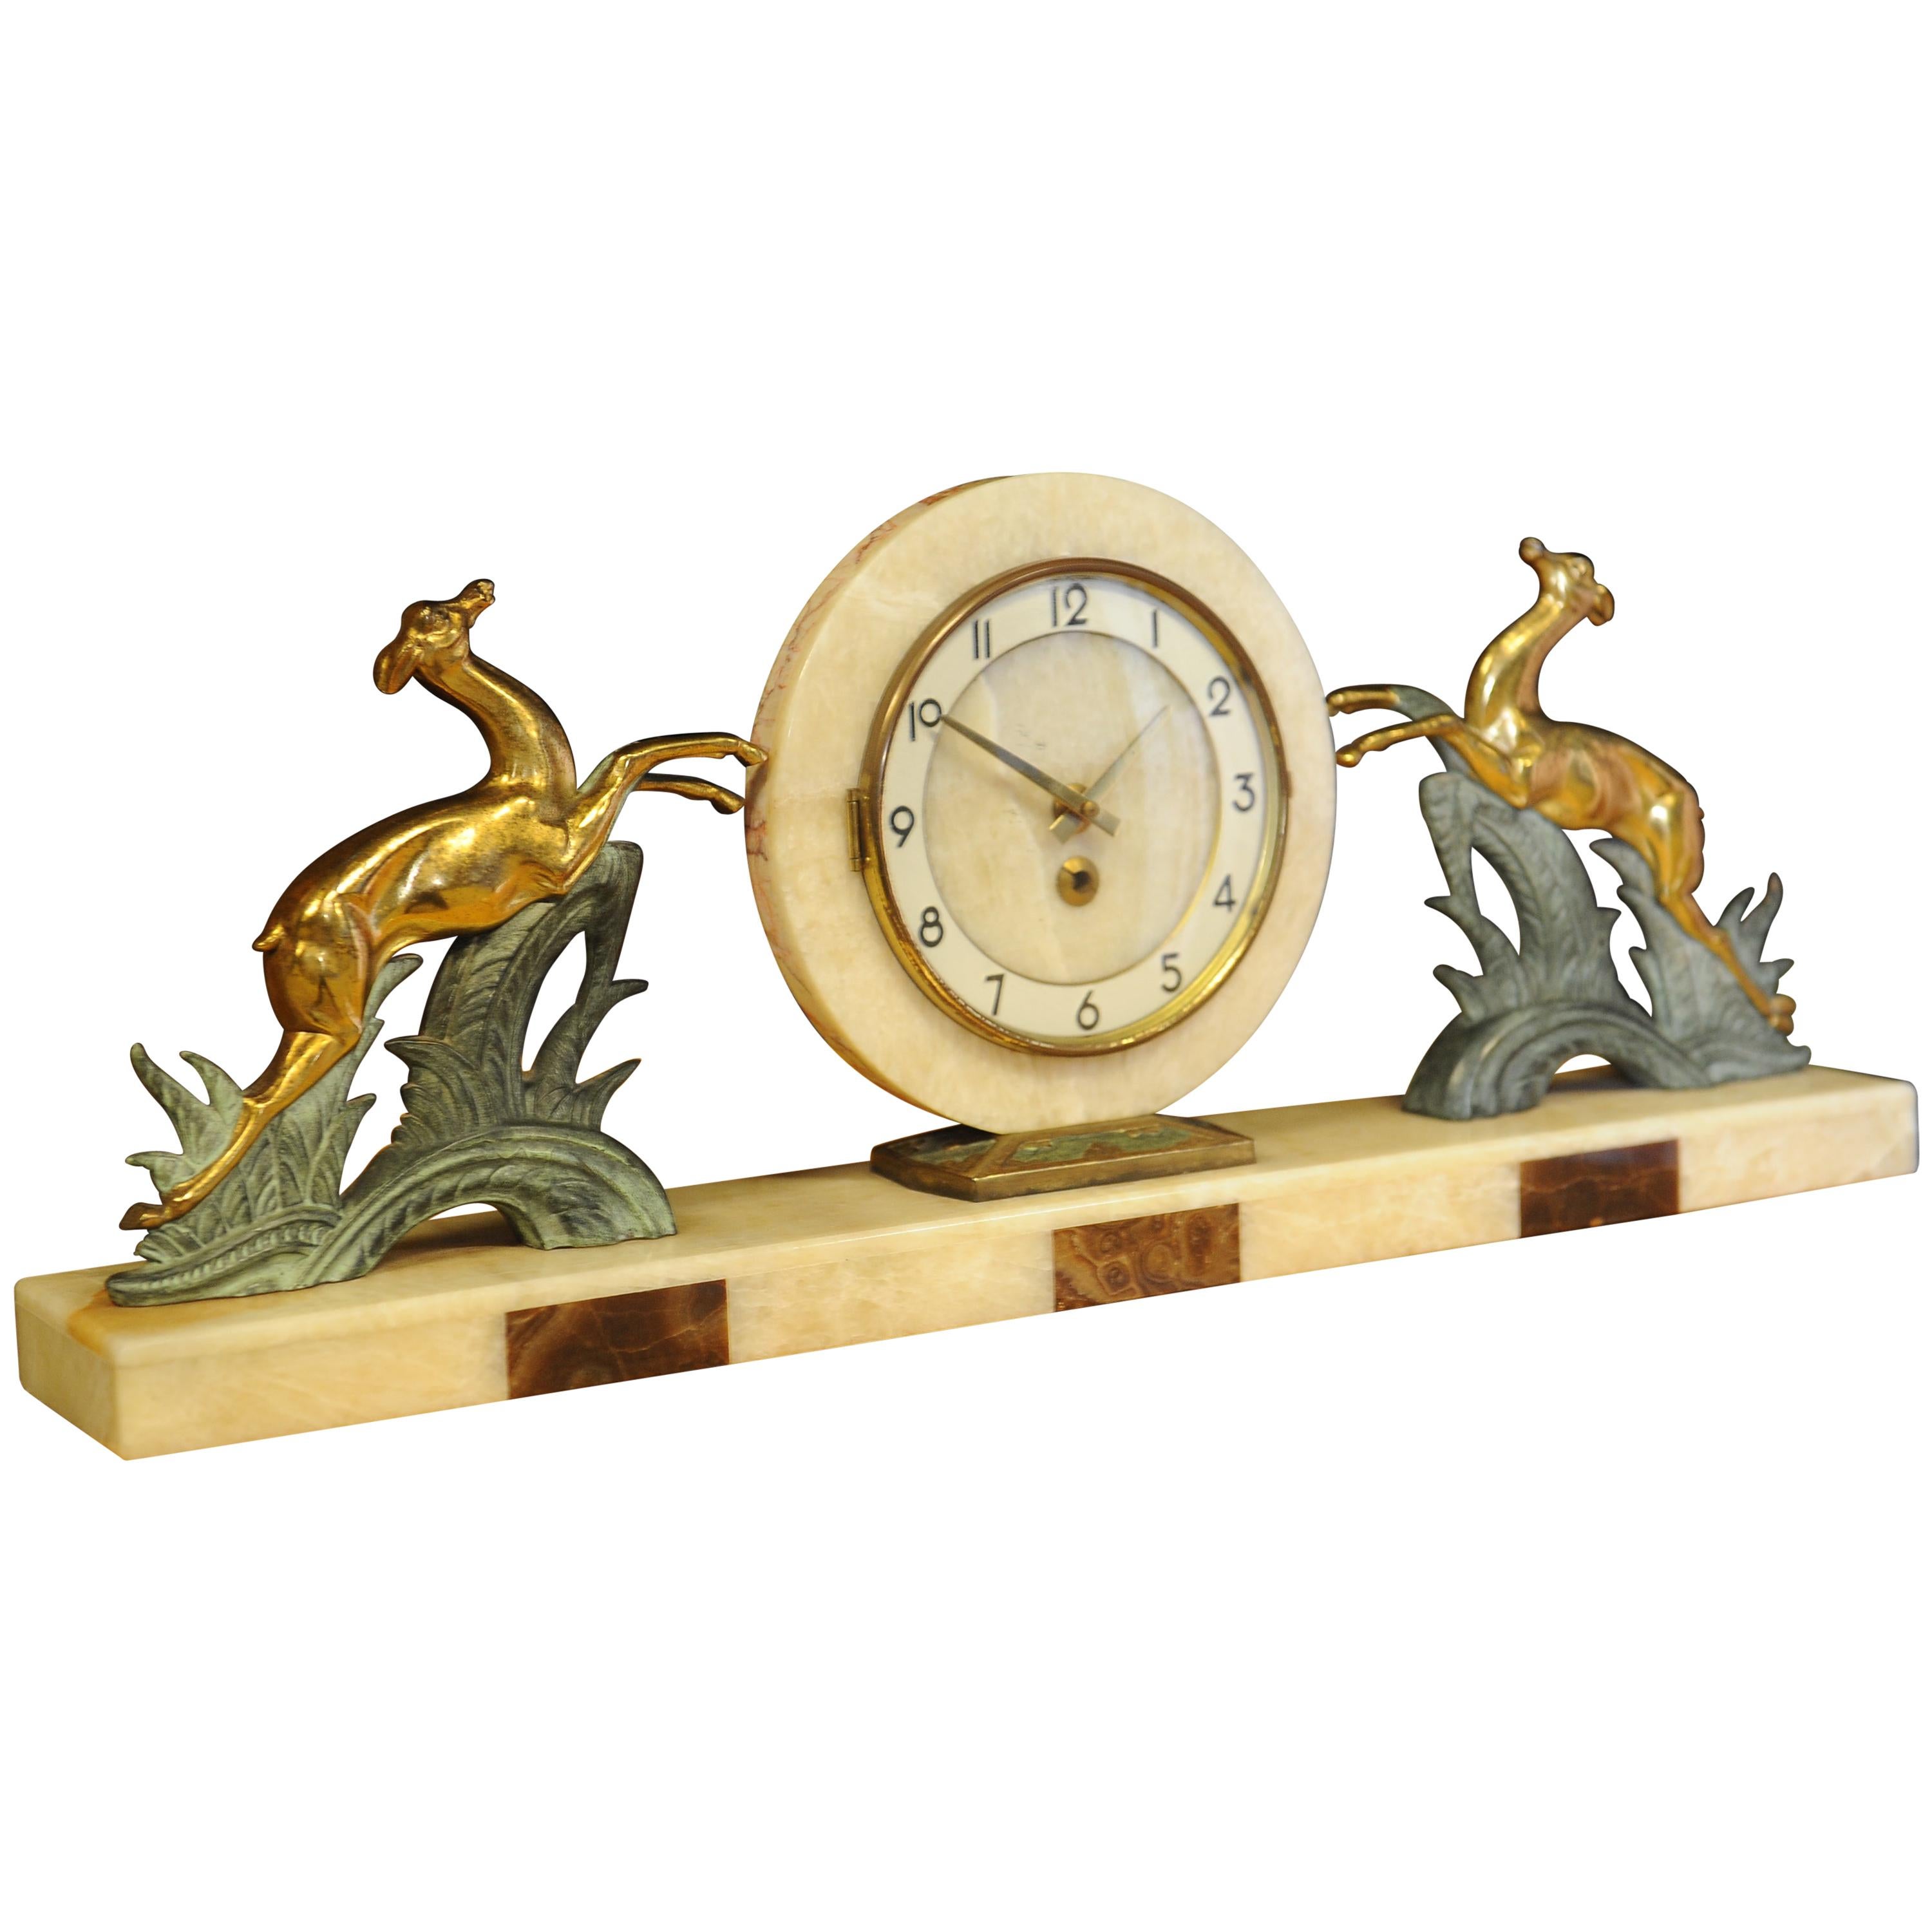 Bayard Art Deco Onyx, Marble and Spelter Mantle Clock with Gilt Leaping Deer For Sale